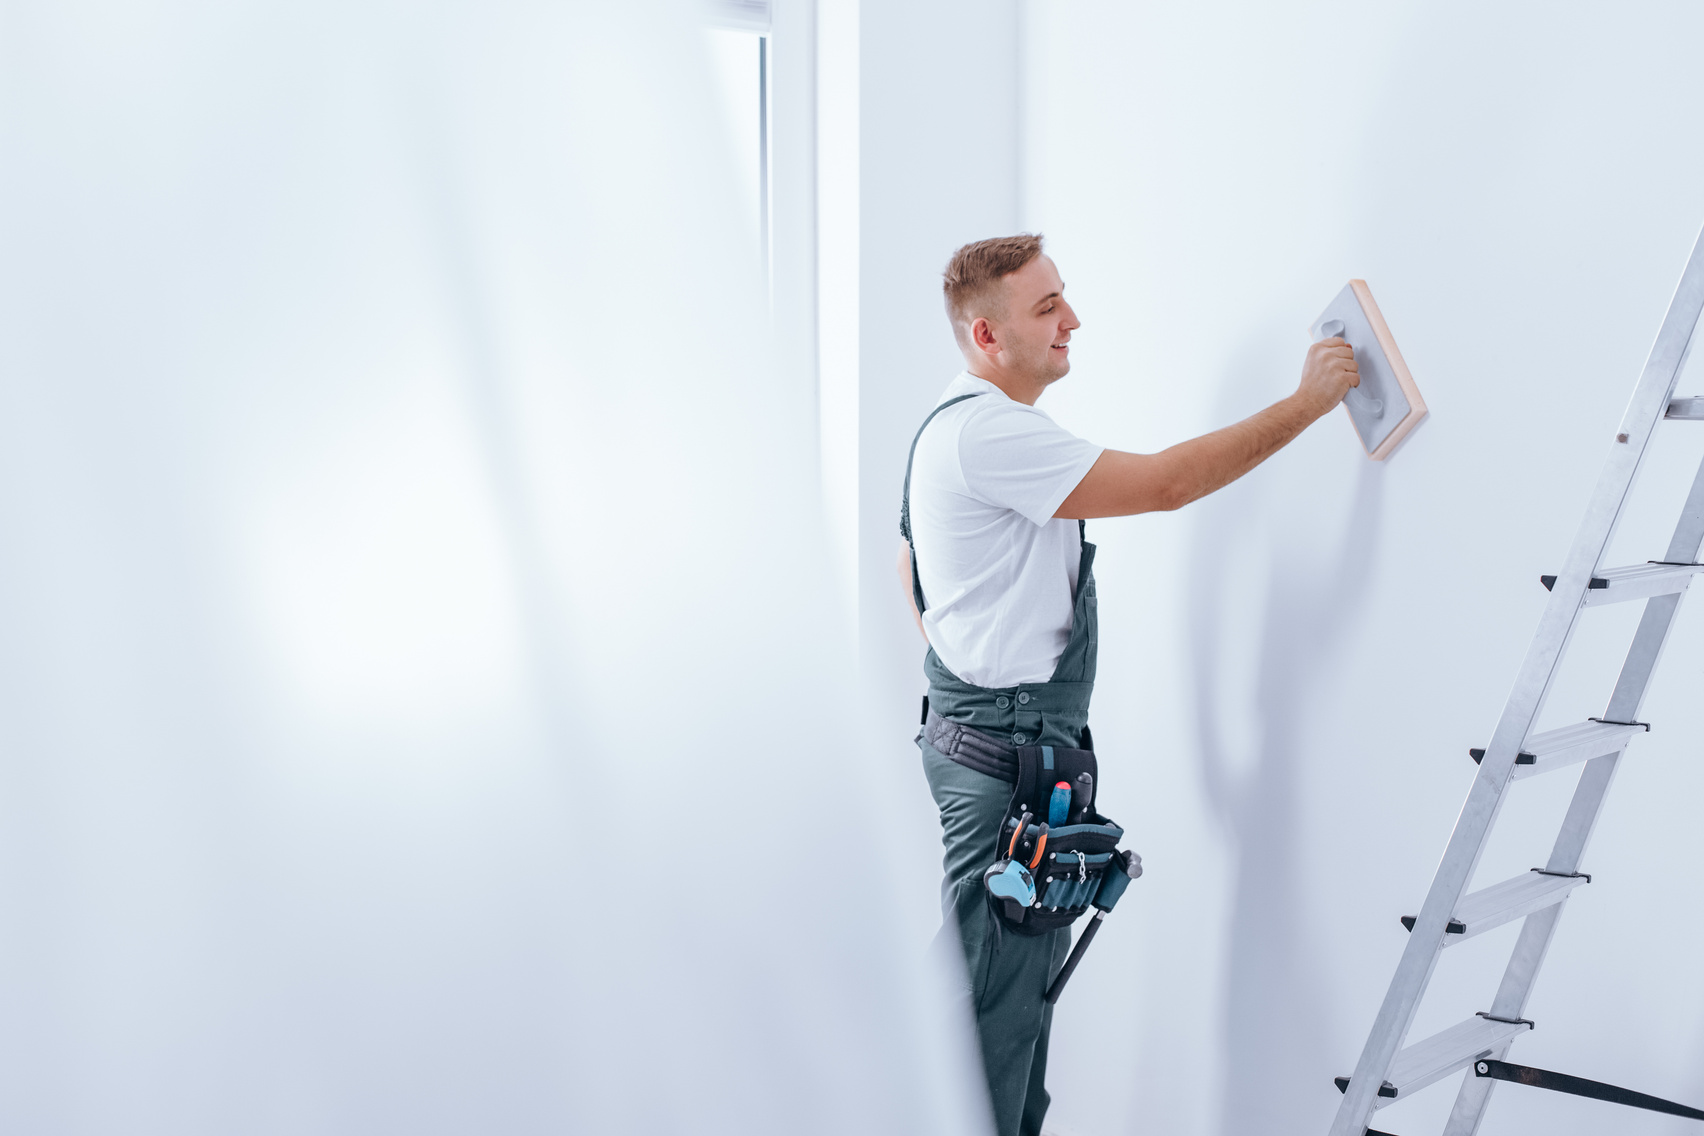 Painter smoothing the wall